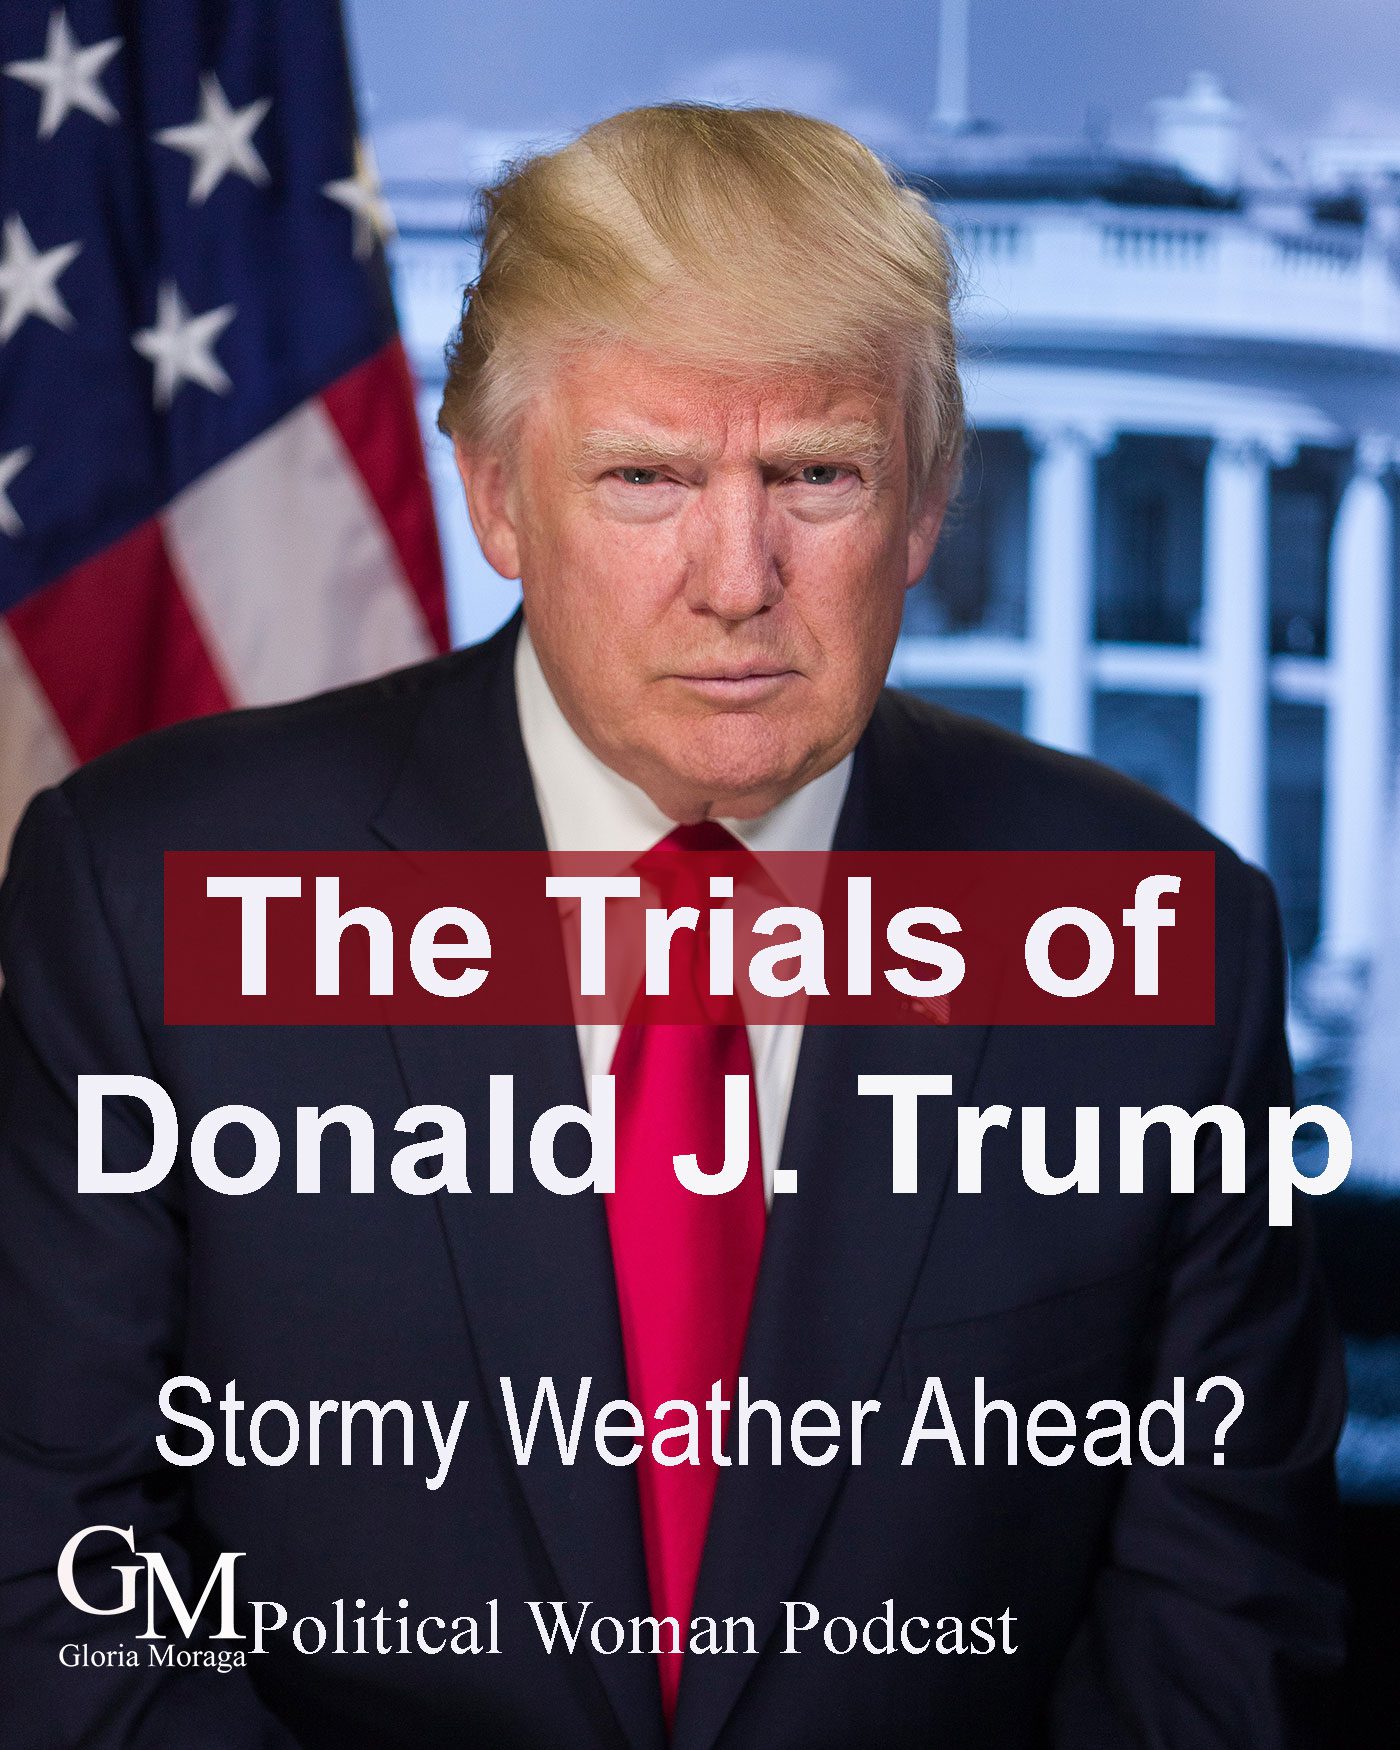 the Trials of Donald Trump - Storny Weaather Ahead?